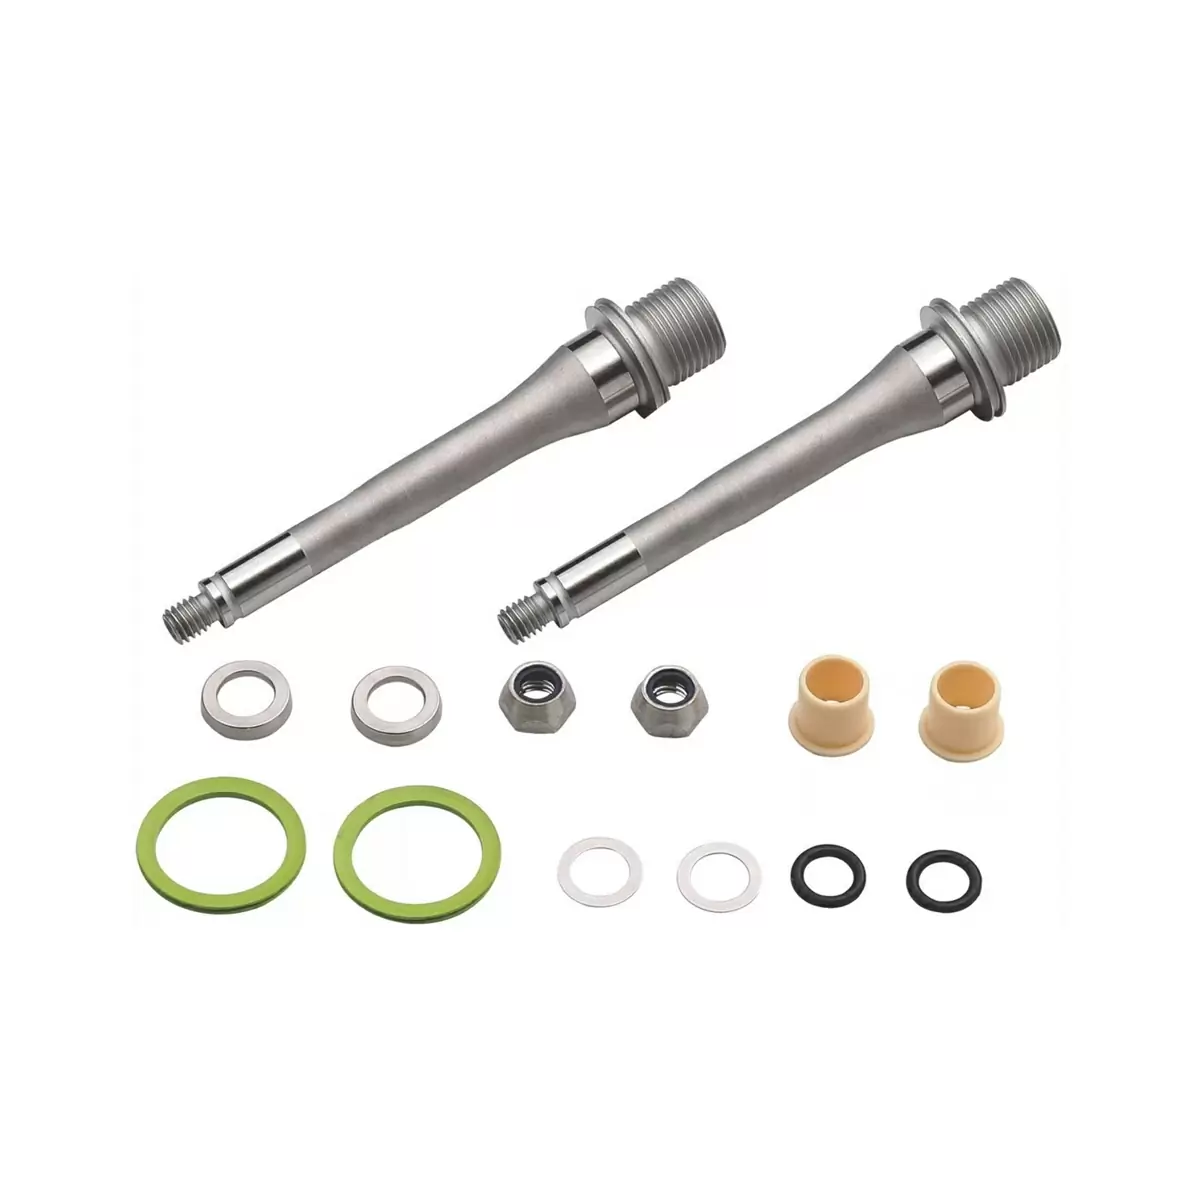 Axle spare kit for Spike and Oozy pedals from 2015 - image